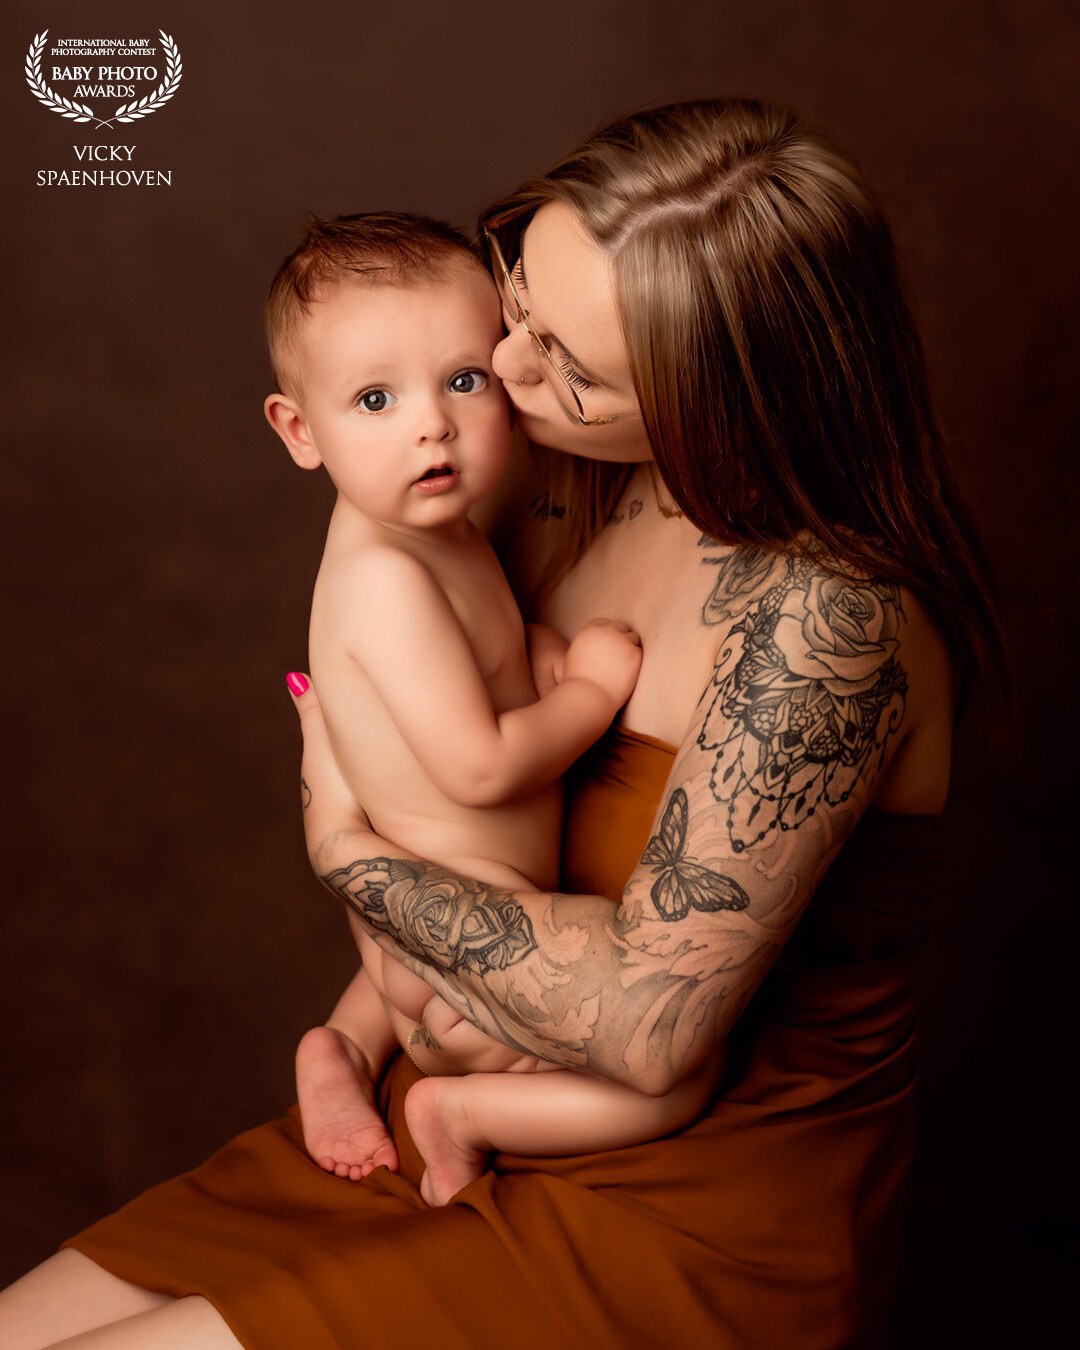 I absolutely love mommy & me sessions. They are so pure and full of love. The emotion, the light, this image has it all.